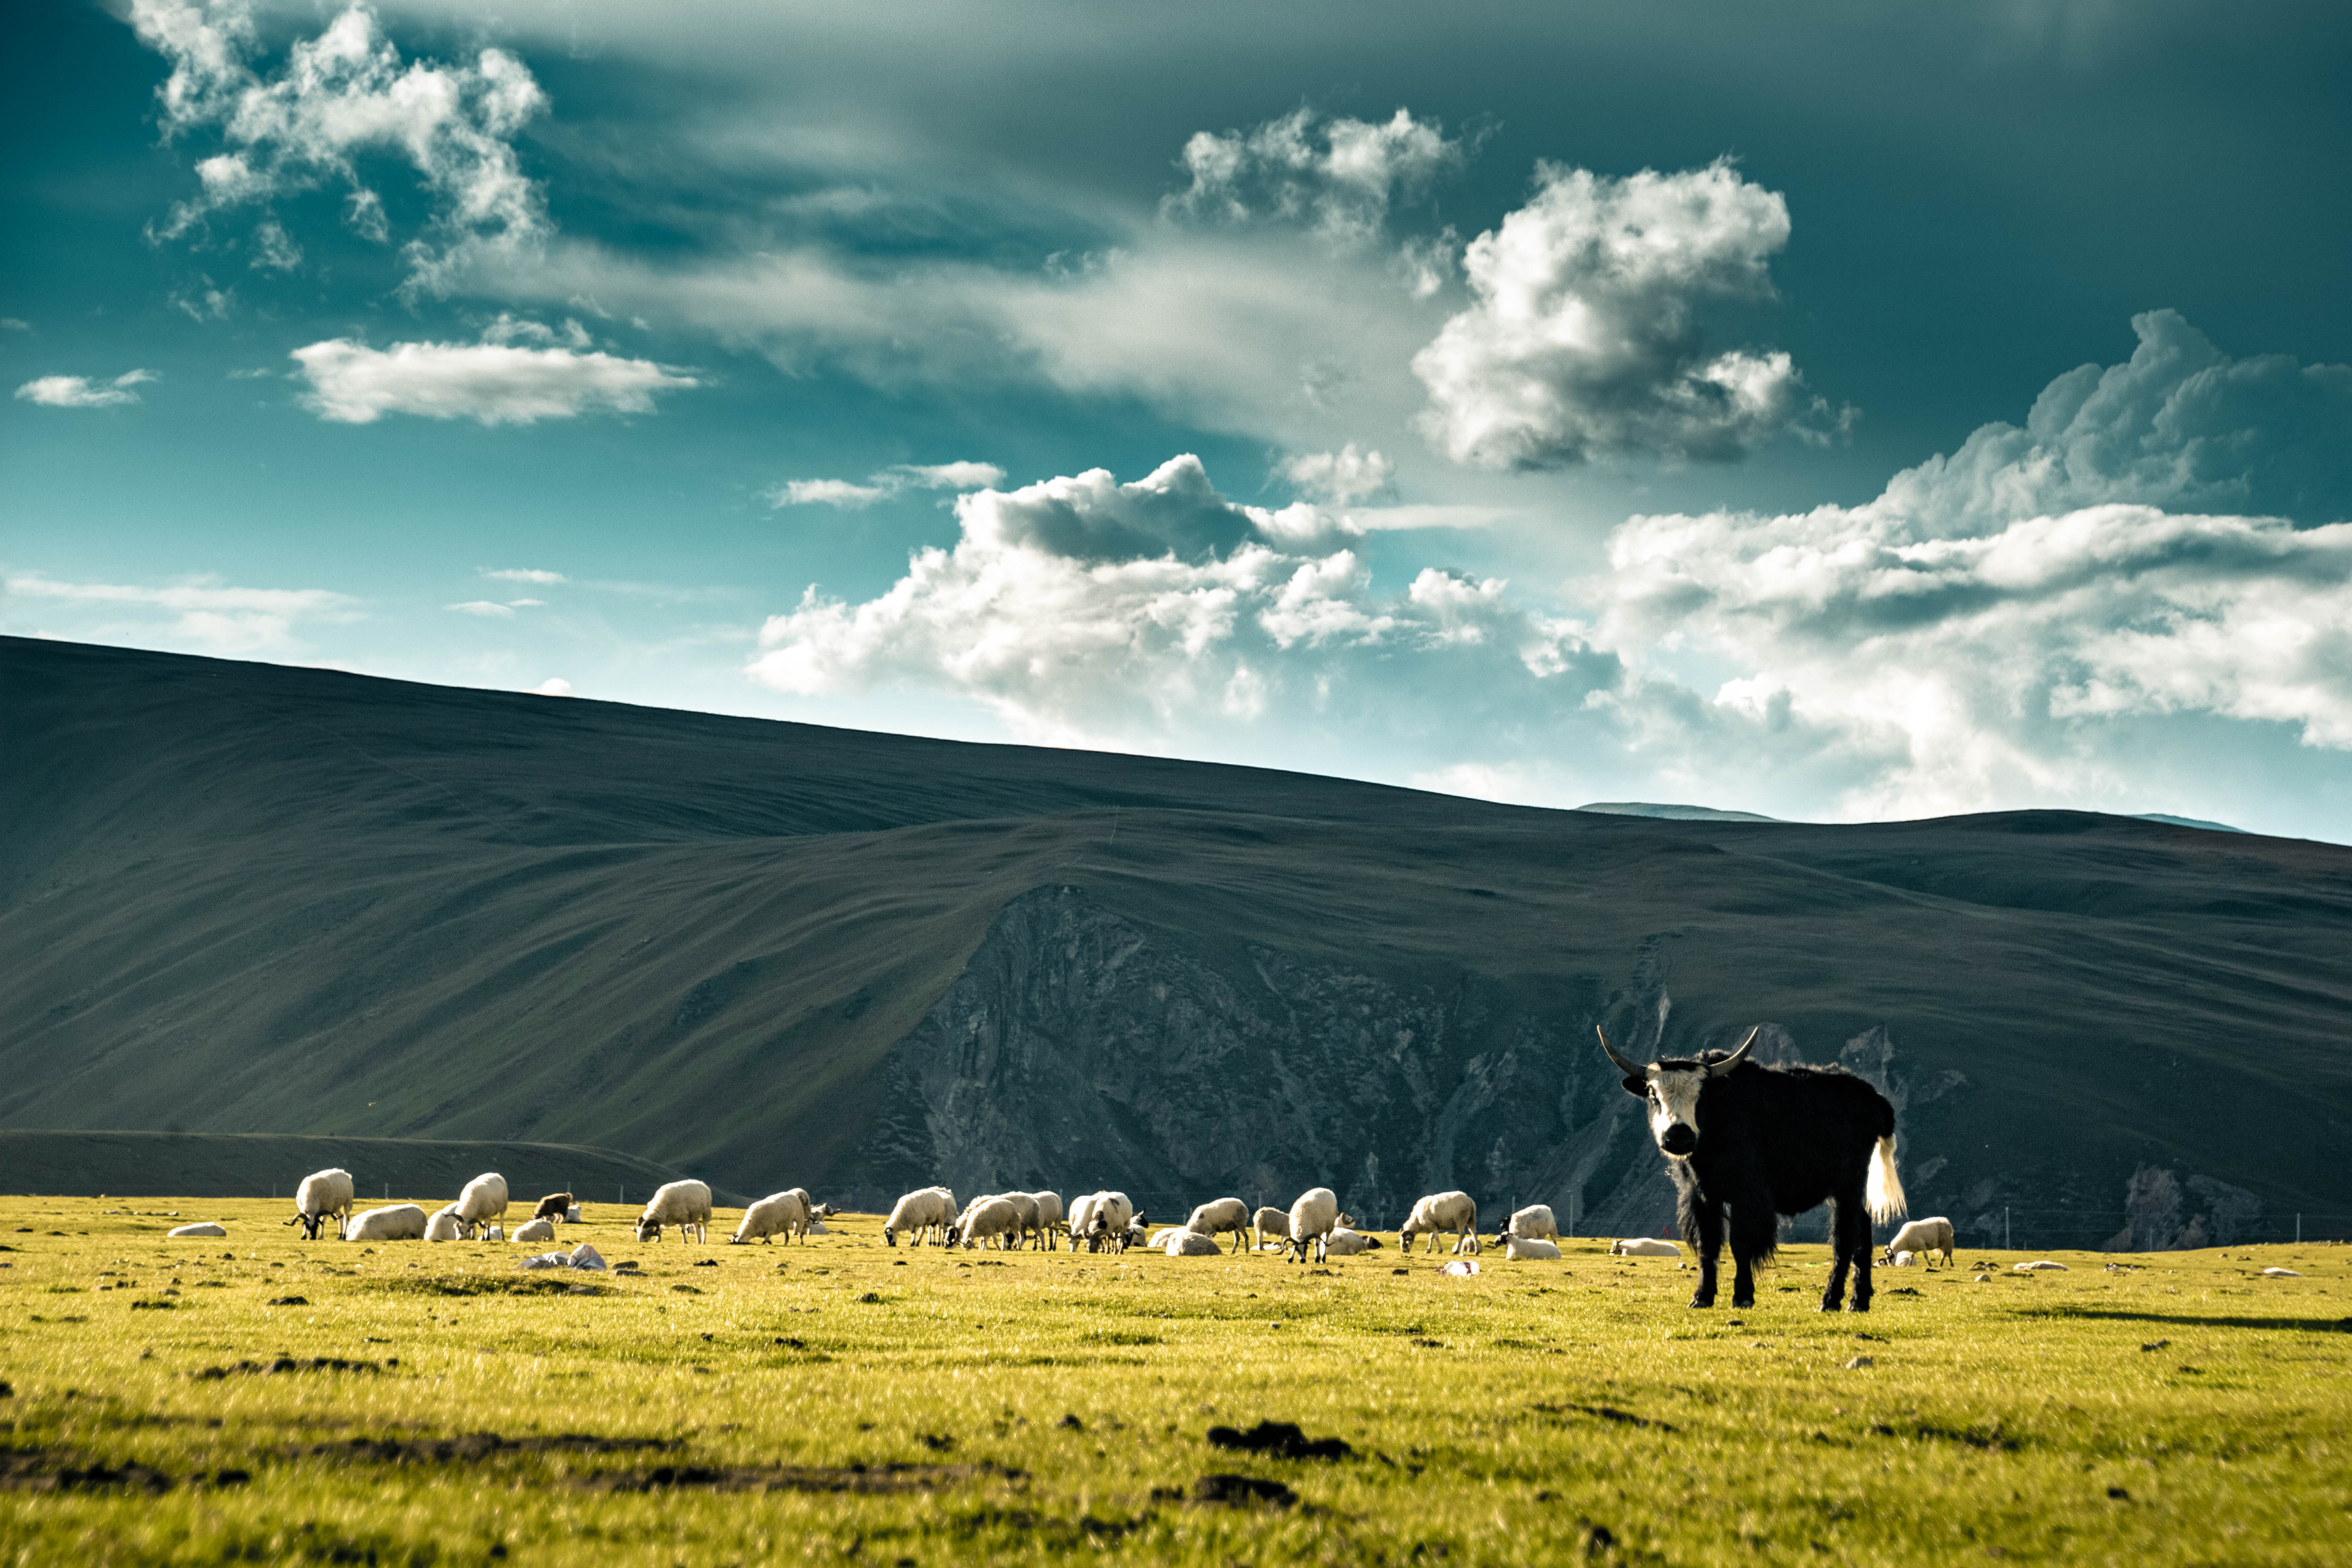 Flocks of yack and sheep surround the humble city, providing food, leather, wool and poop, useful to keep the fire burning and warm nomad families. The grassland has no fences, only Winter is an enemy. Soon, flocks and nomads will reach lower lands and follow the breath of the seasons endlessly.